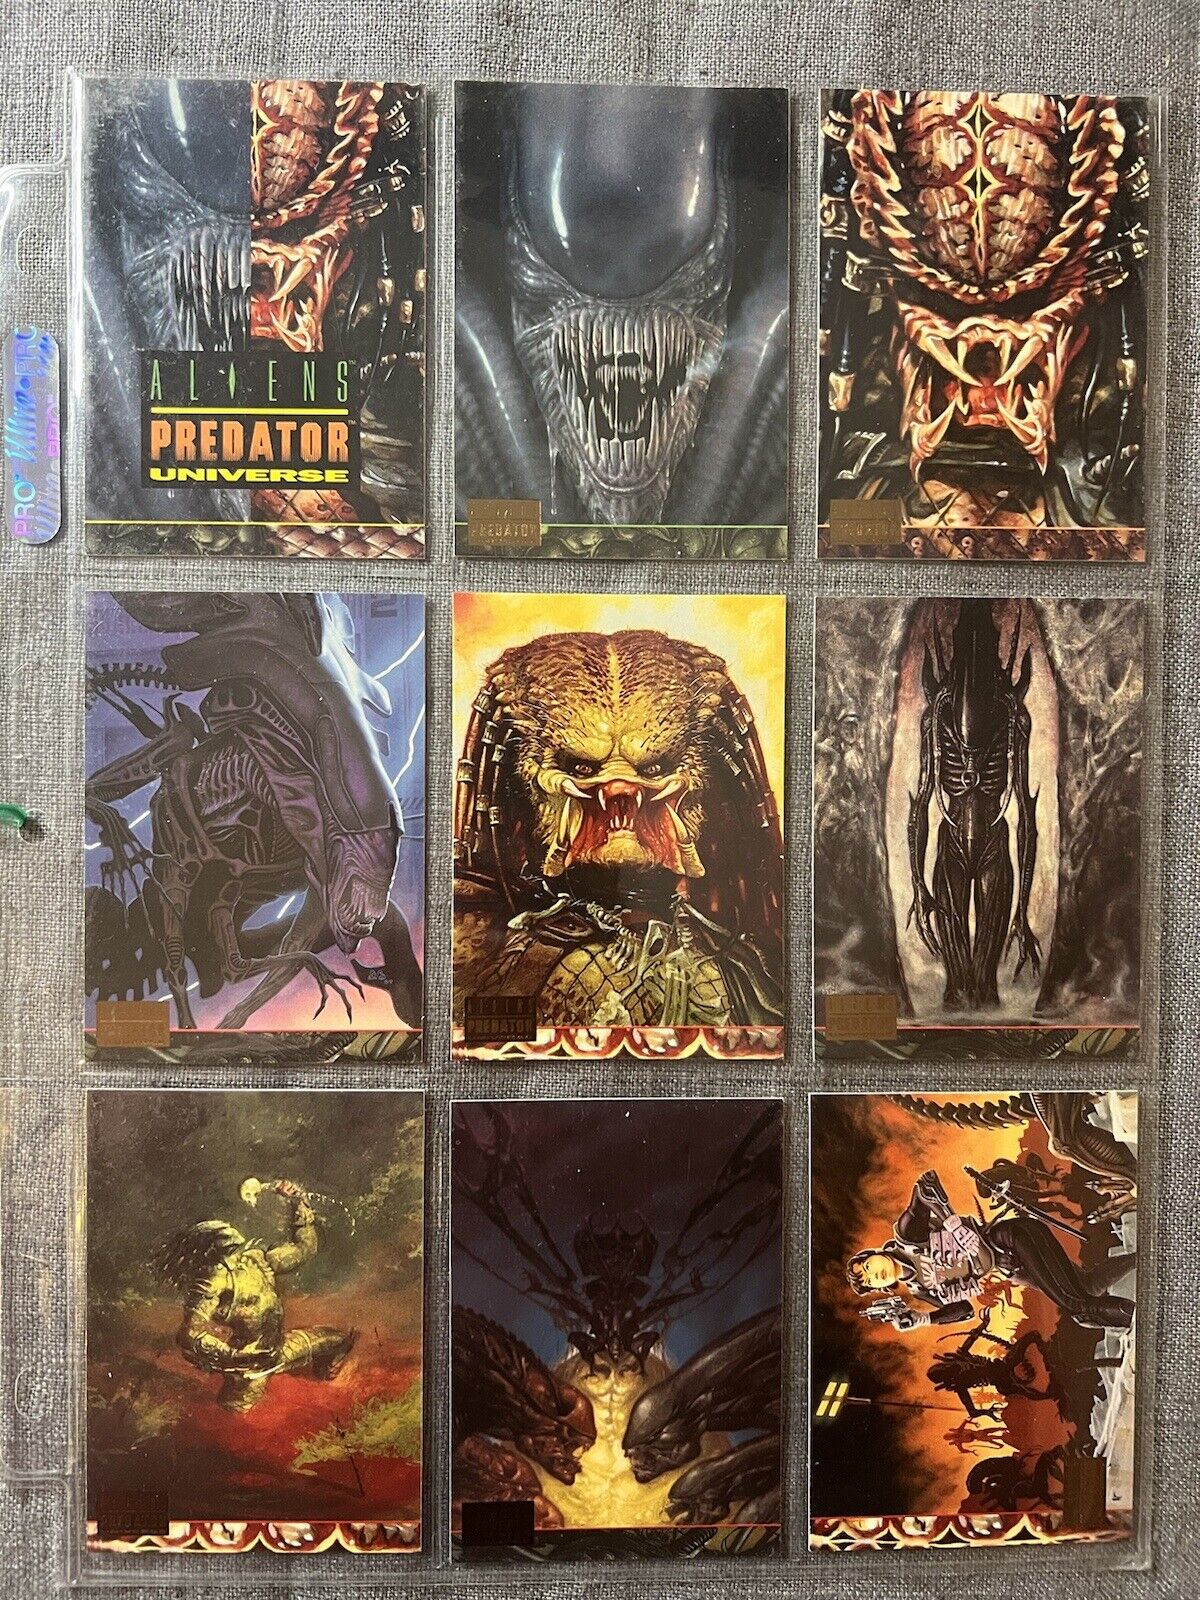 1994 Topps Aliens/Predator Universe Complete Base Card Set Of 72 Cards NM